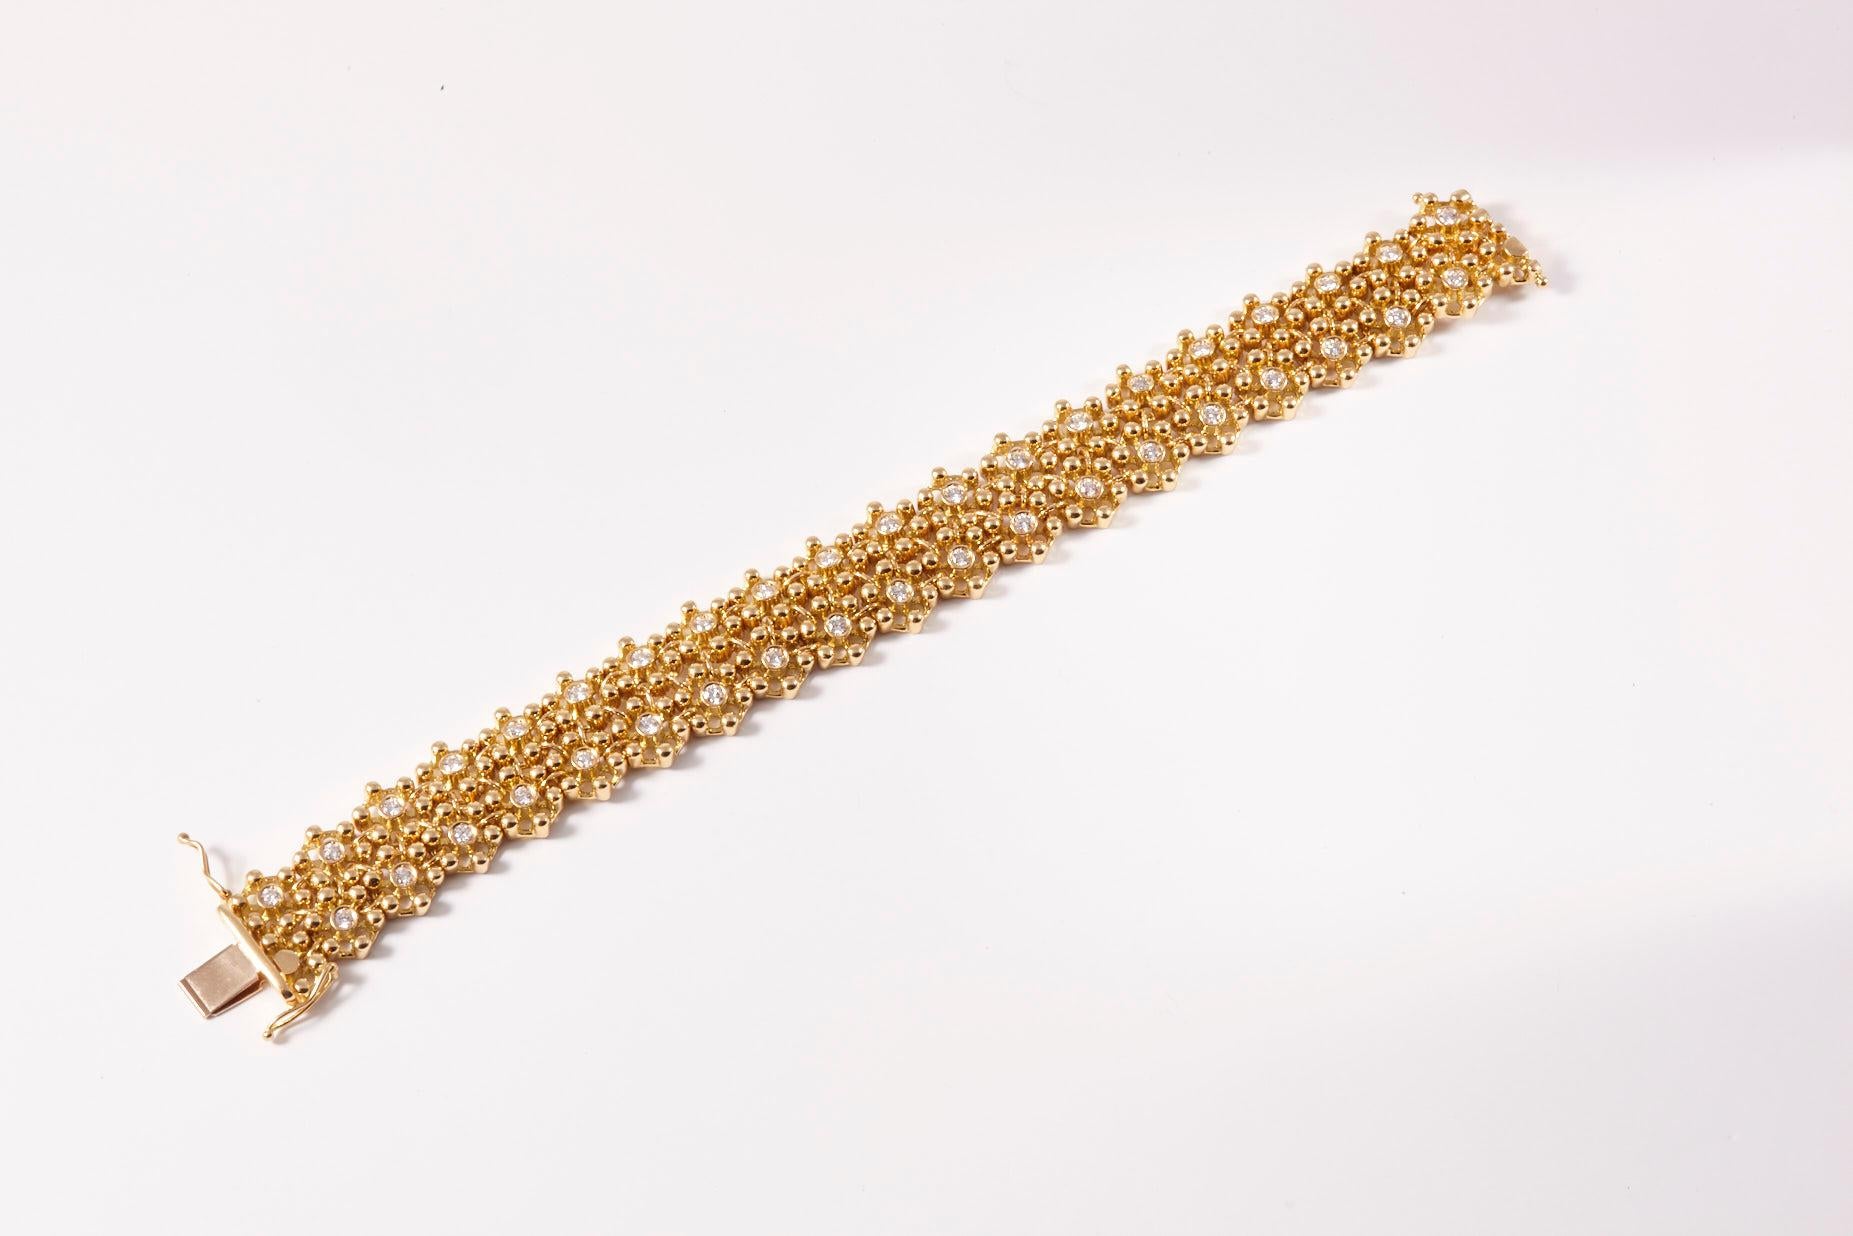 Italian made 18 Karat Yellow gold & Diamonds flower link gold bracelet.
Vintage marvel of jewelry manufacturing ingenuity, this diamond scarf bracelet will fell like liquid silk on your wrist. Showcasing the talents of master craftsmen this marvel